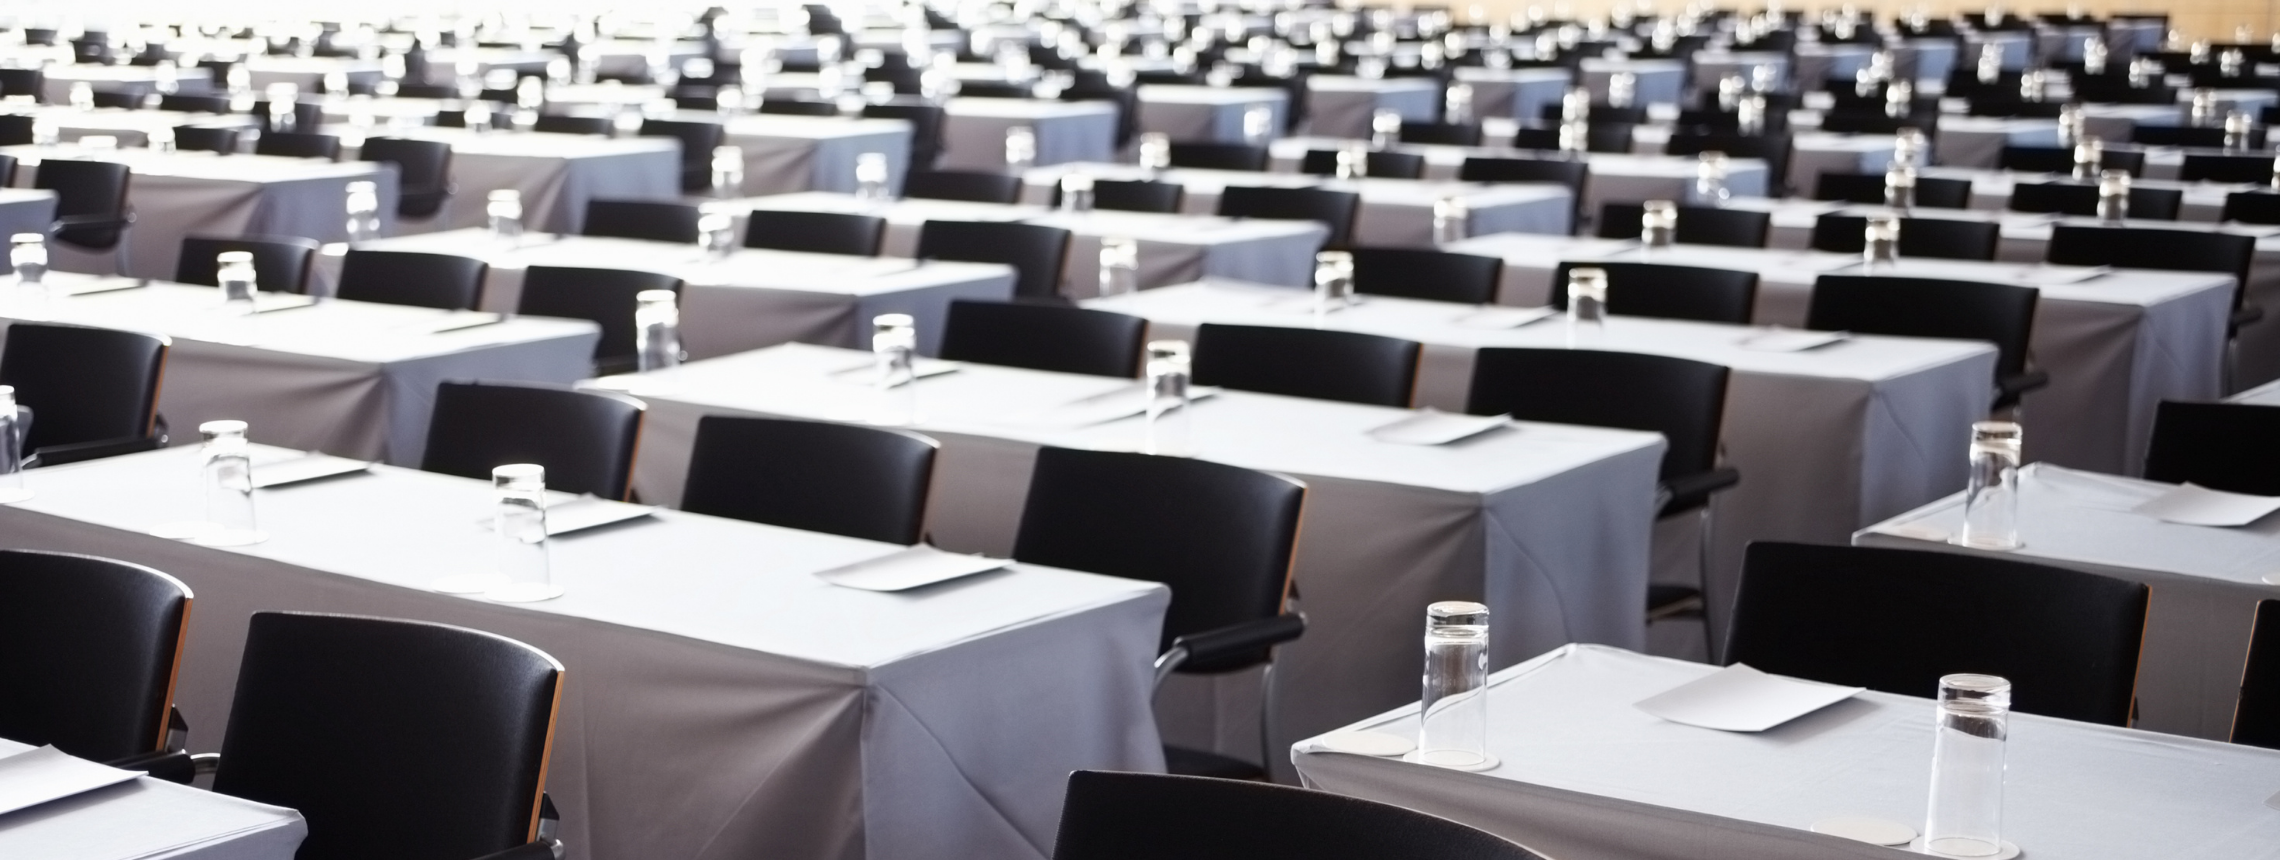 Event security management - Large conference room filled with tables